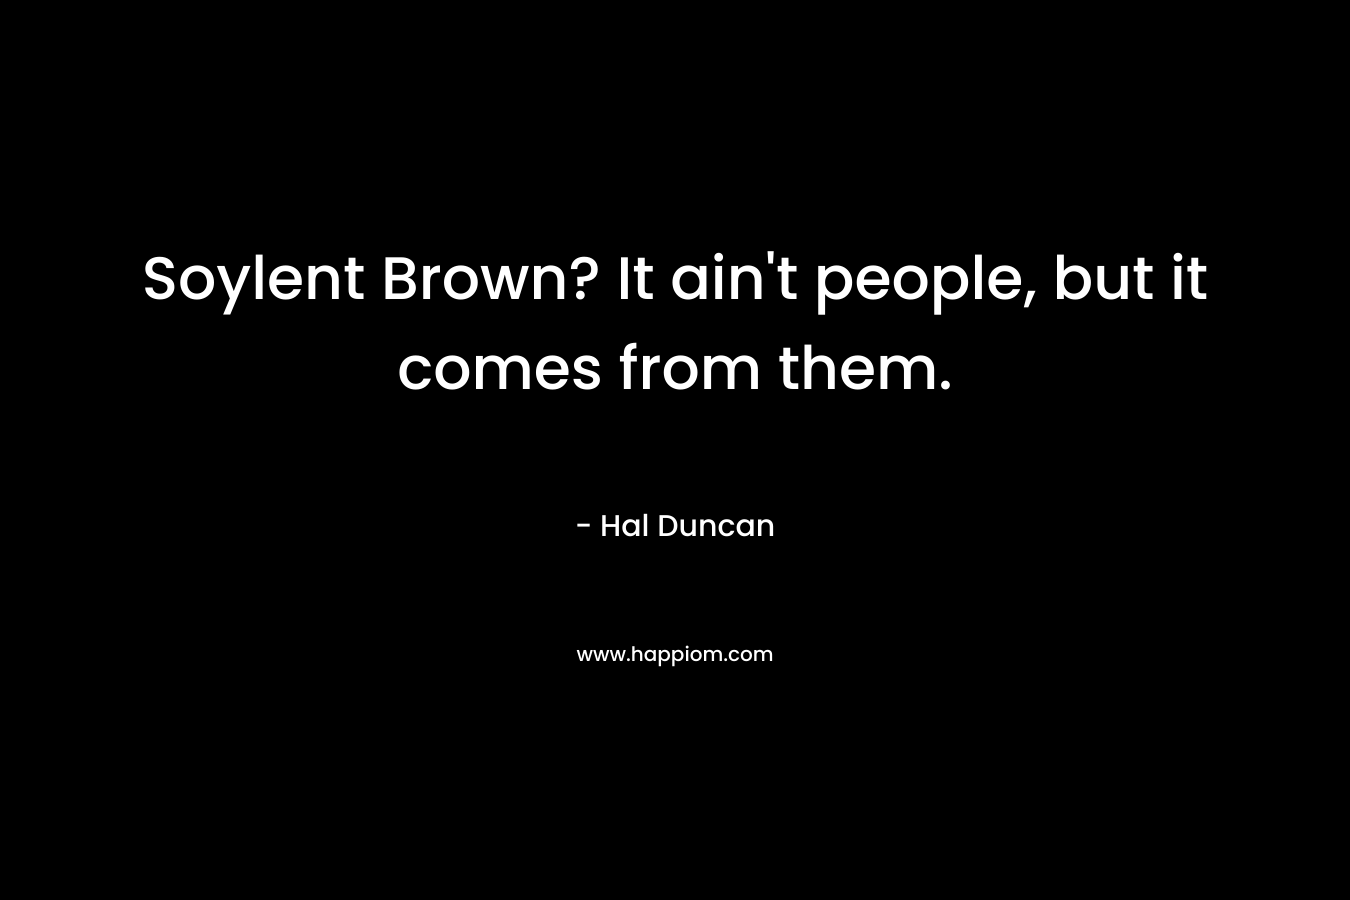 Soylent Brown? It ain’t people, but it comes from them. – Hal Duncan